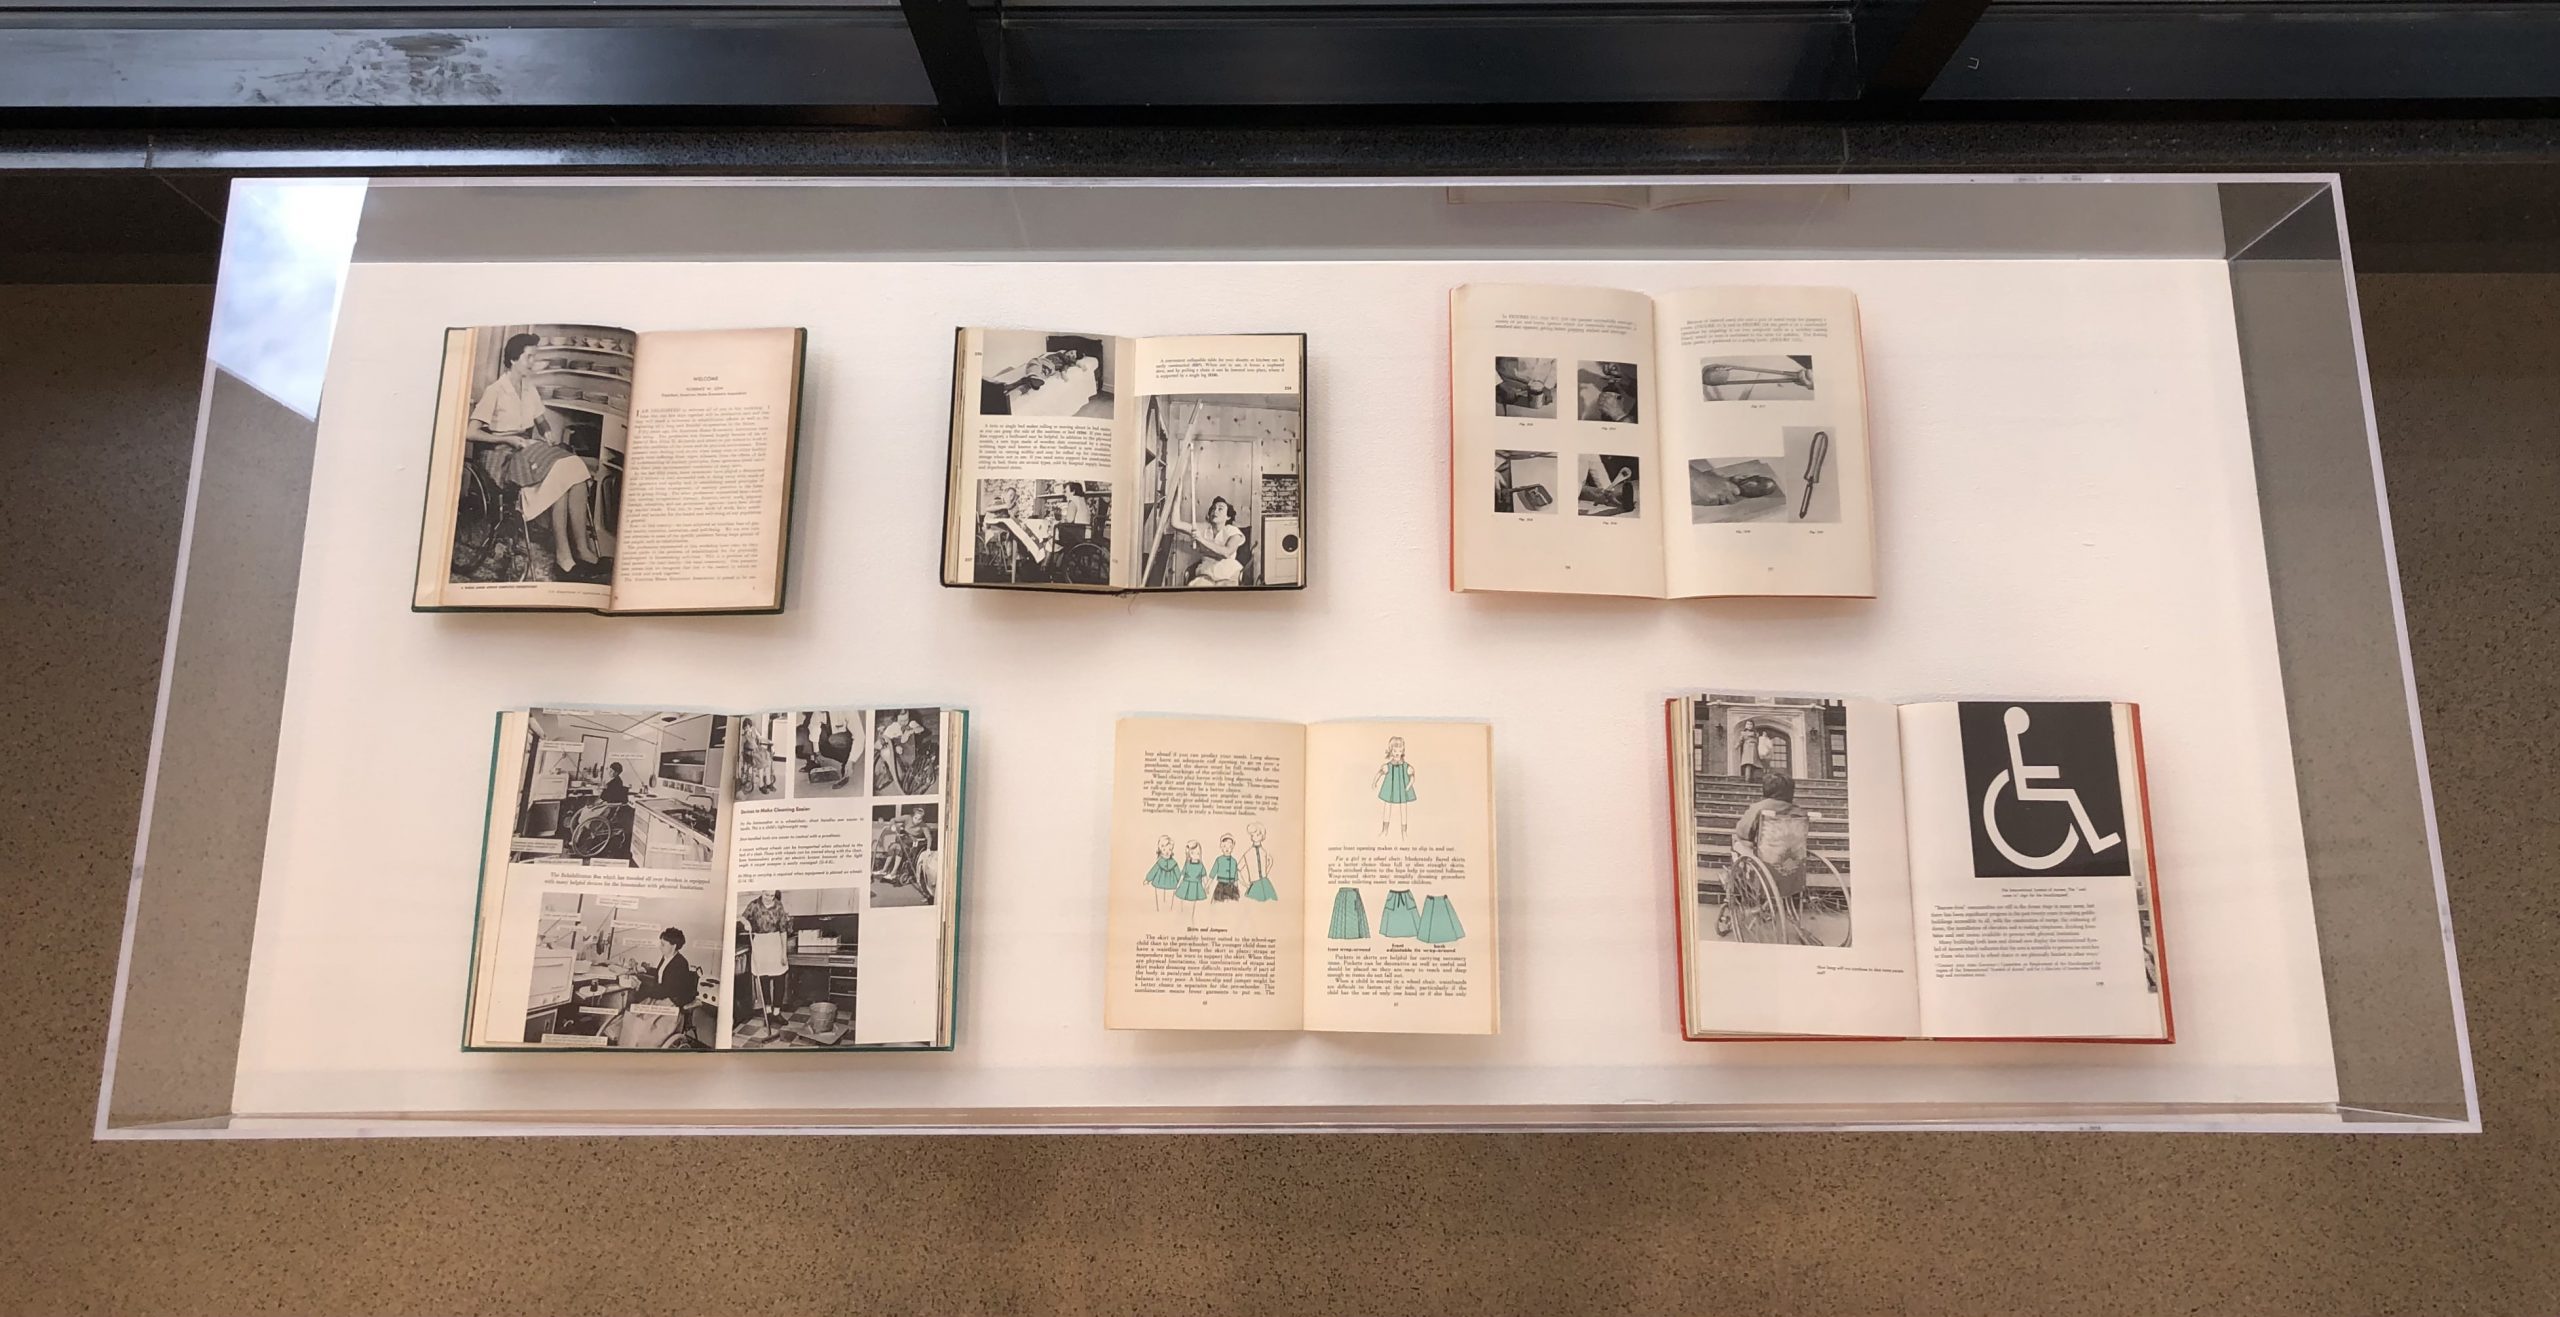 Bess Williamson - Selection of Books Documenting “Handicapped Homemaker” Design Projects